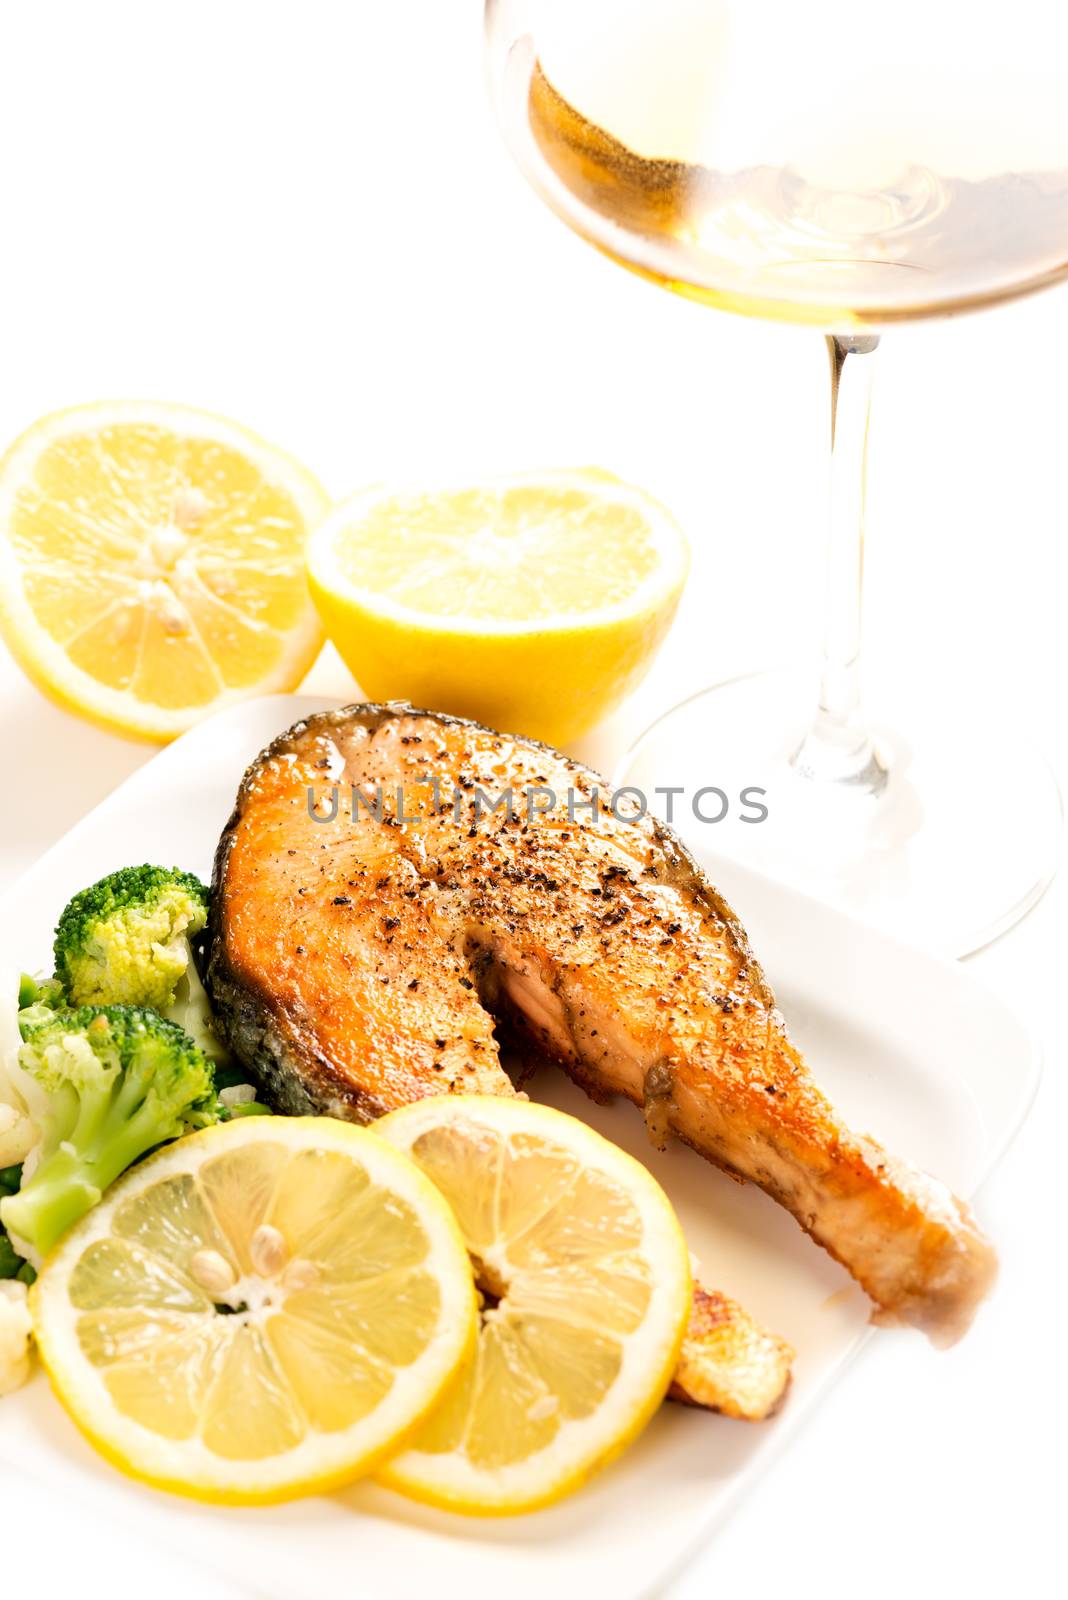 Grilled salmon and vegetables on plate vertical with wine by Nanisimova